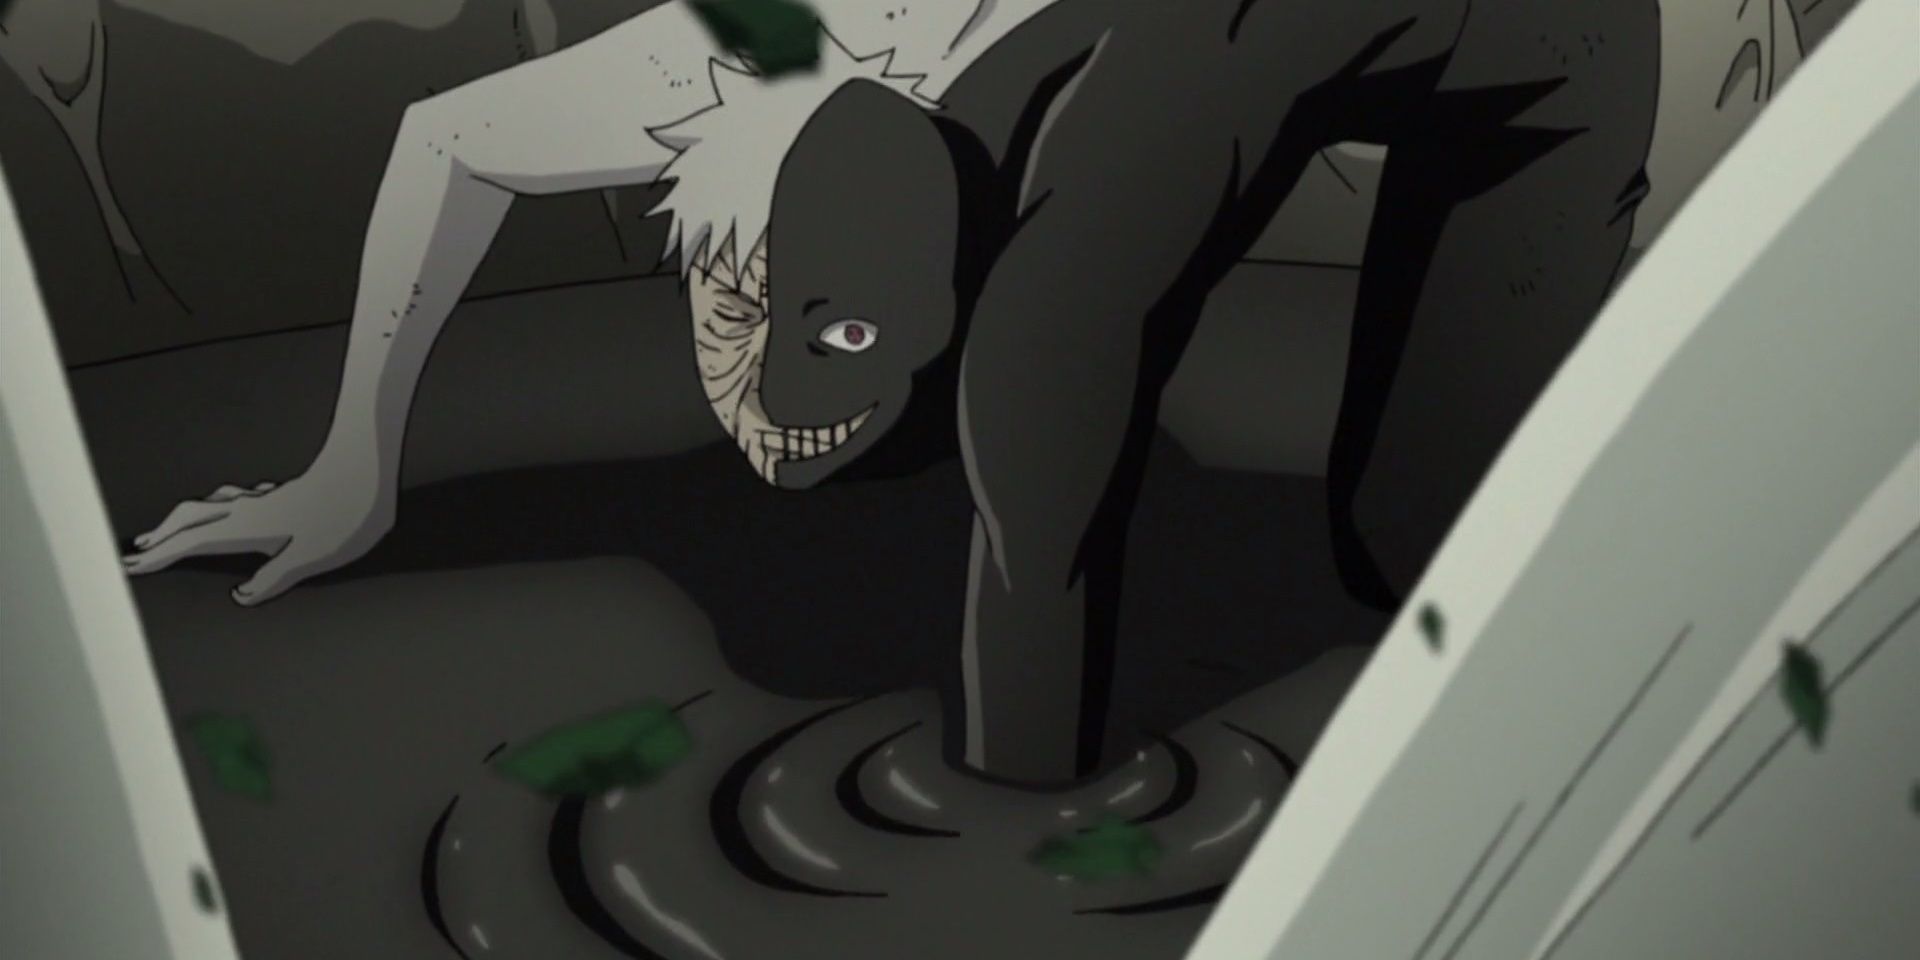 Black Zetsu with Obito absorbed in Naruto Shippuden.